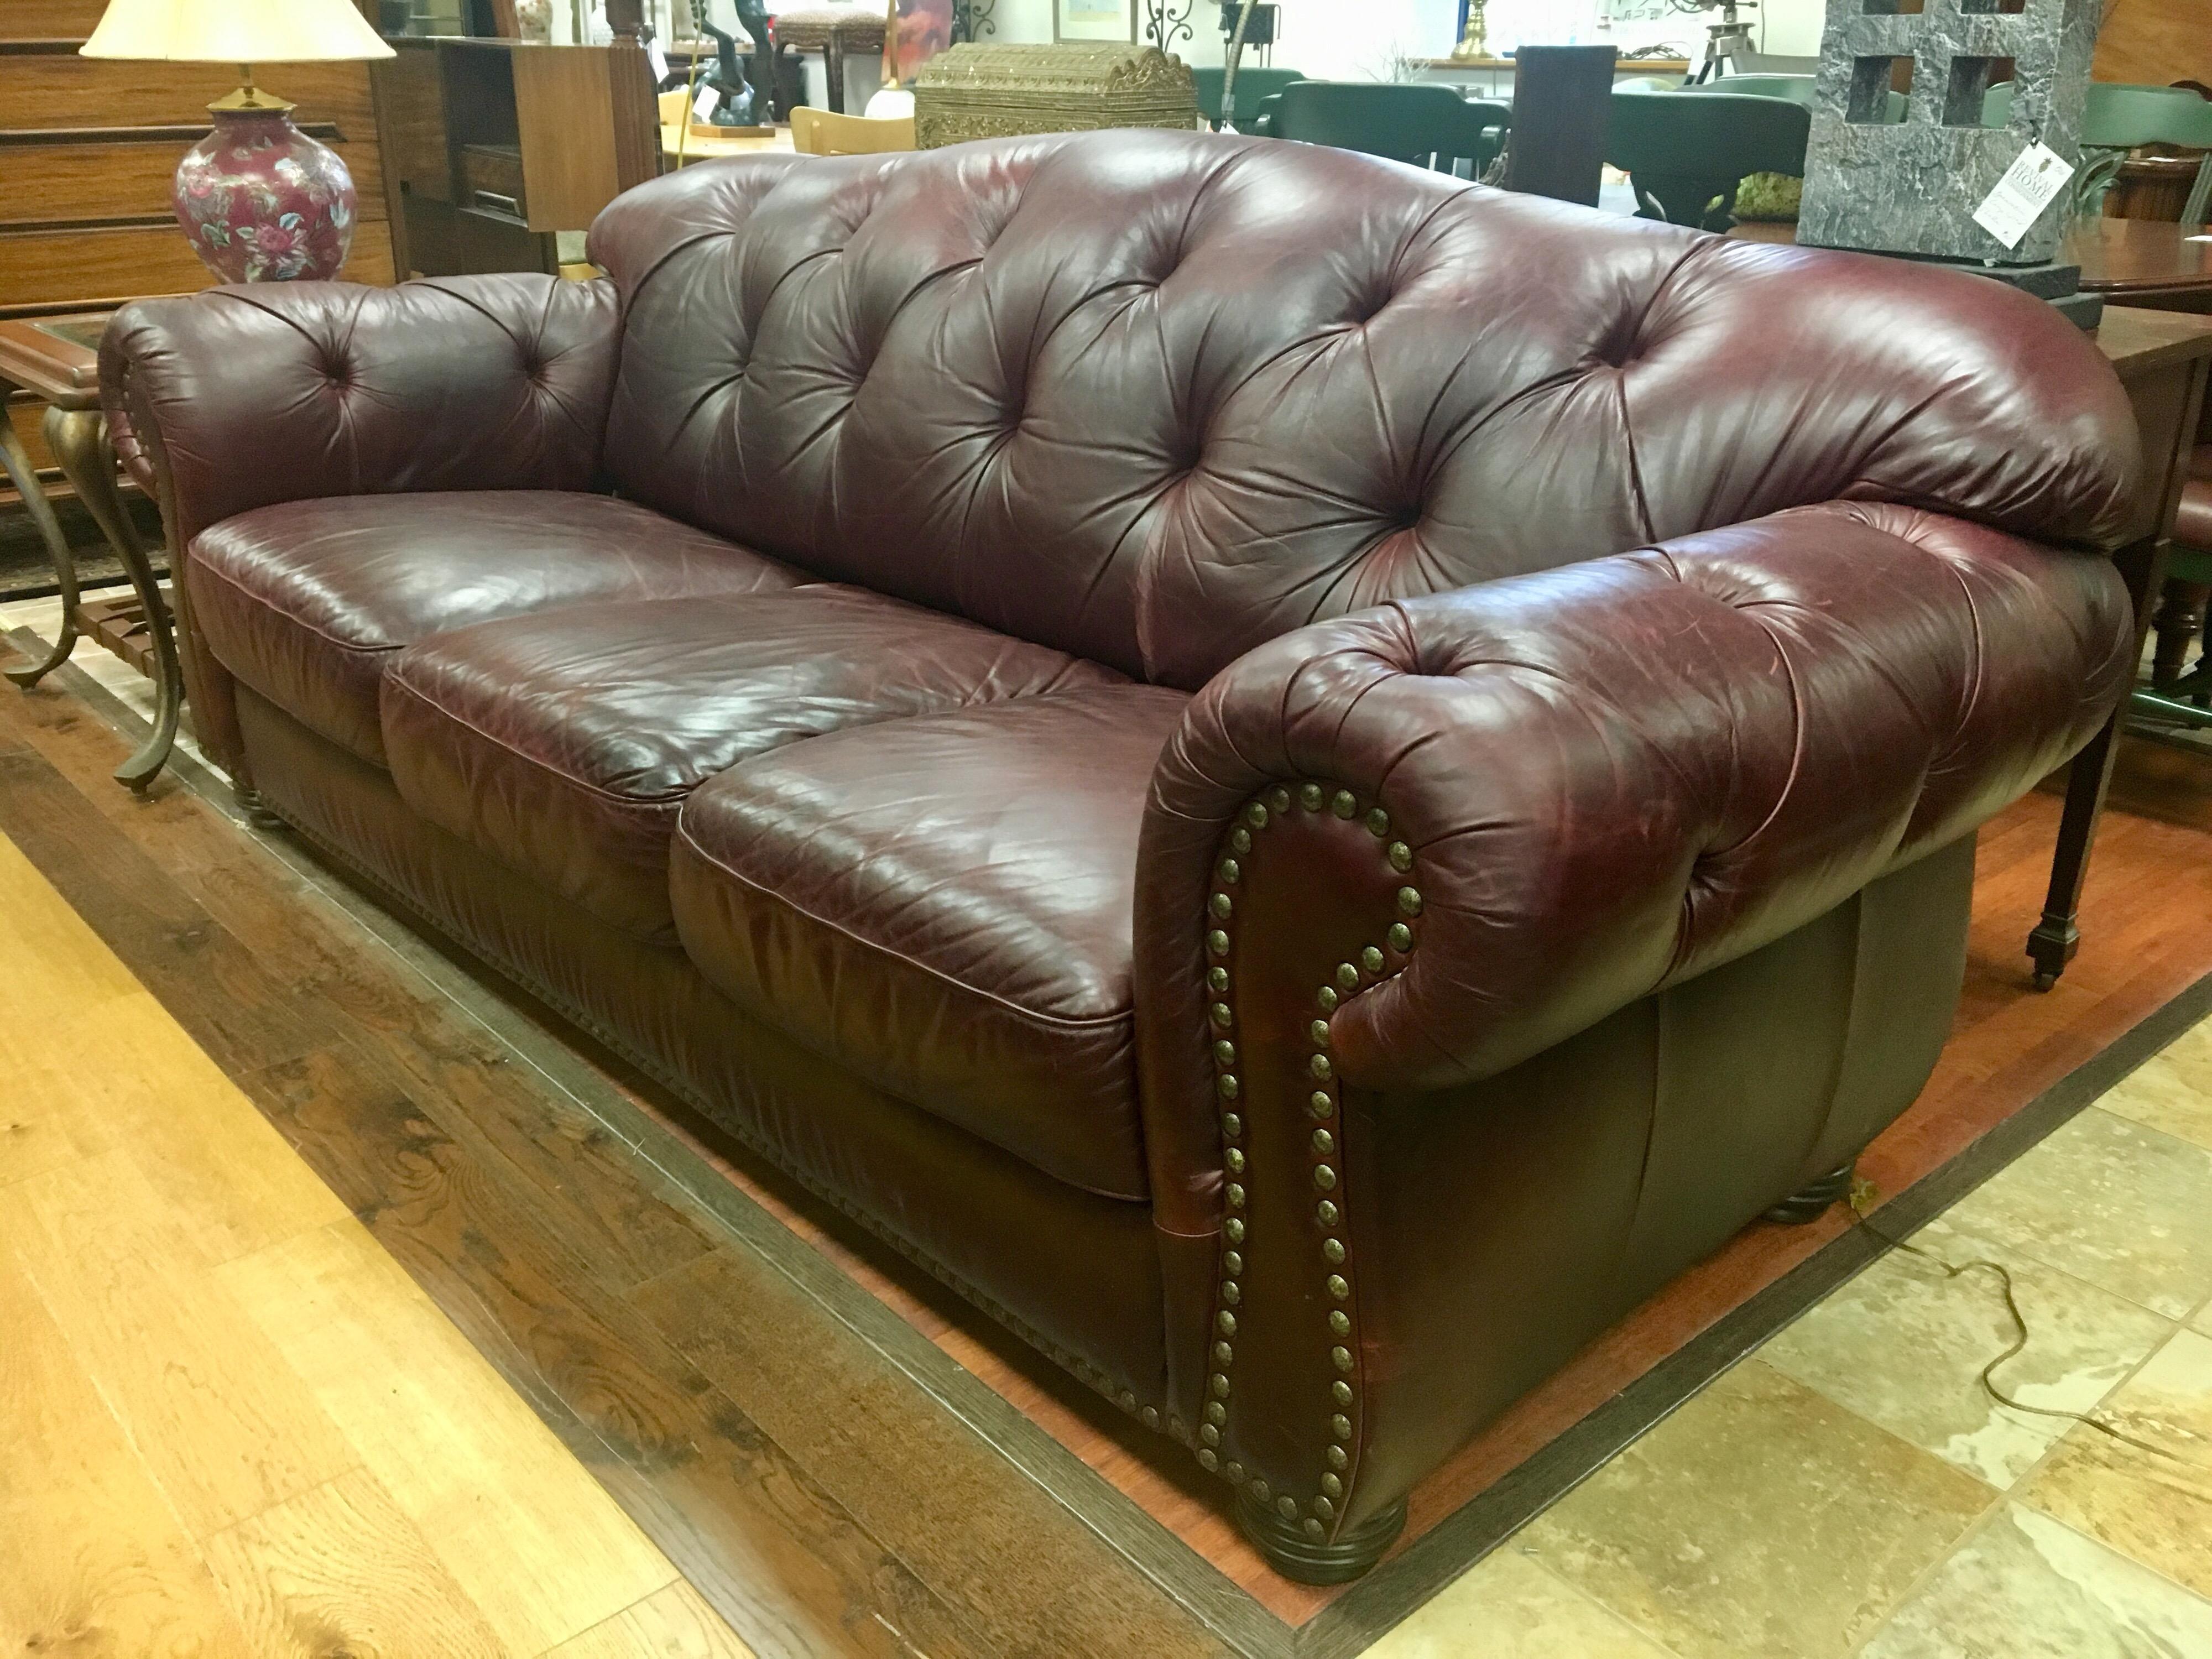 Ultra luxurious chesterfield oxblood large sofa made in Italy. Made in Italy hallmarks on bottom.
Rare and coveted oxblood burgundy tufted leather with railheads. The leather is like butter, so smooth.